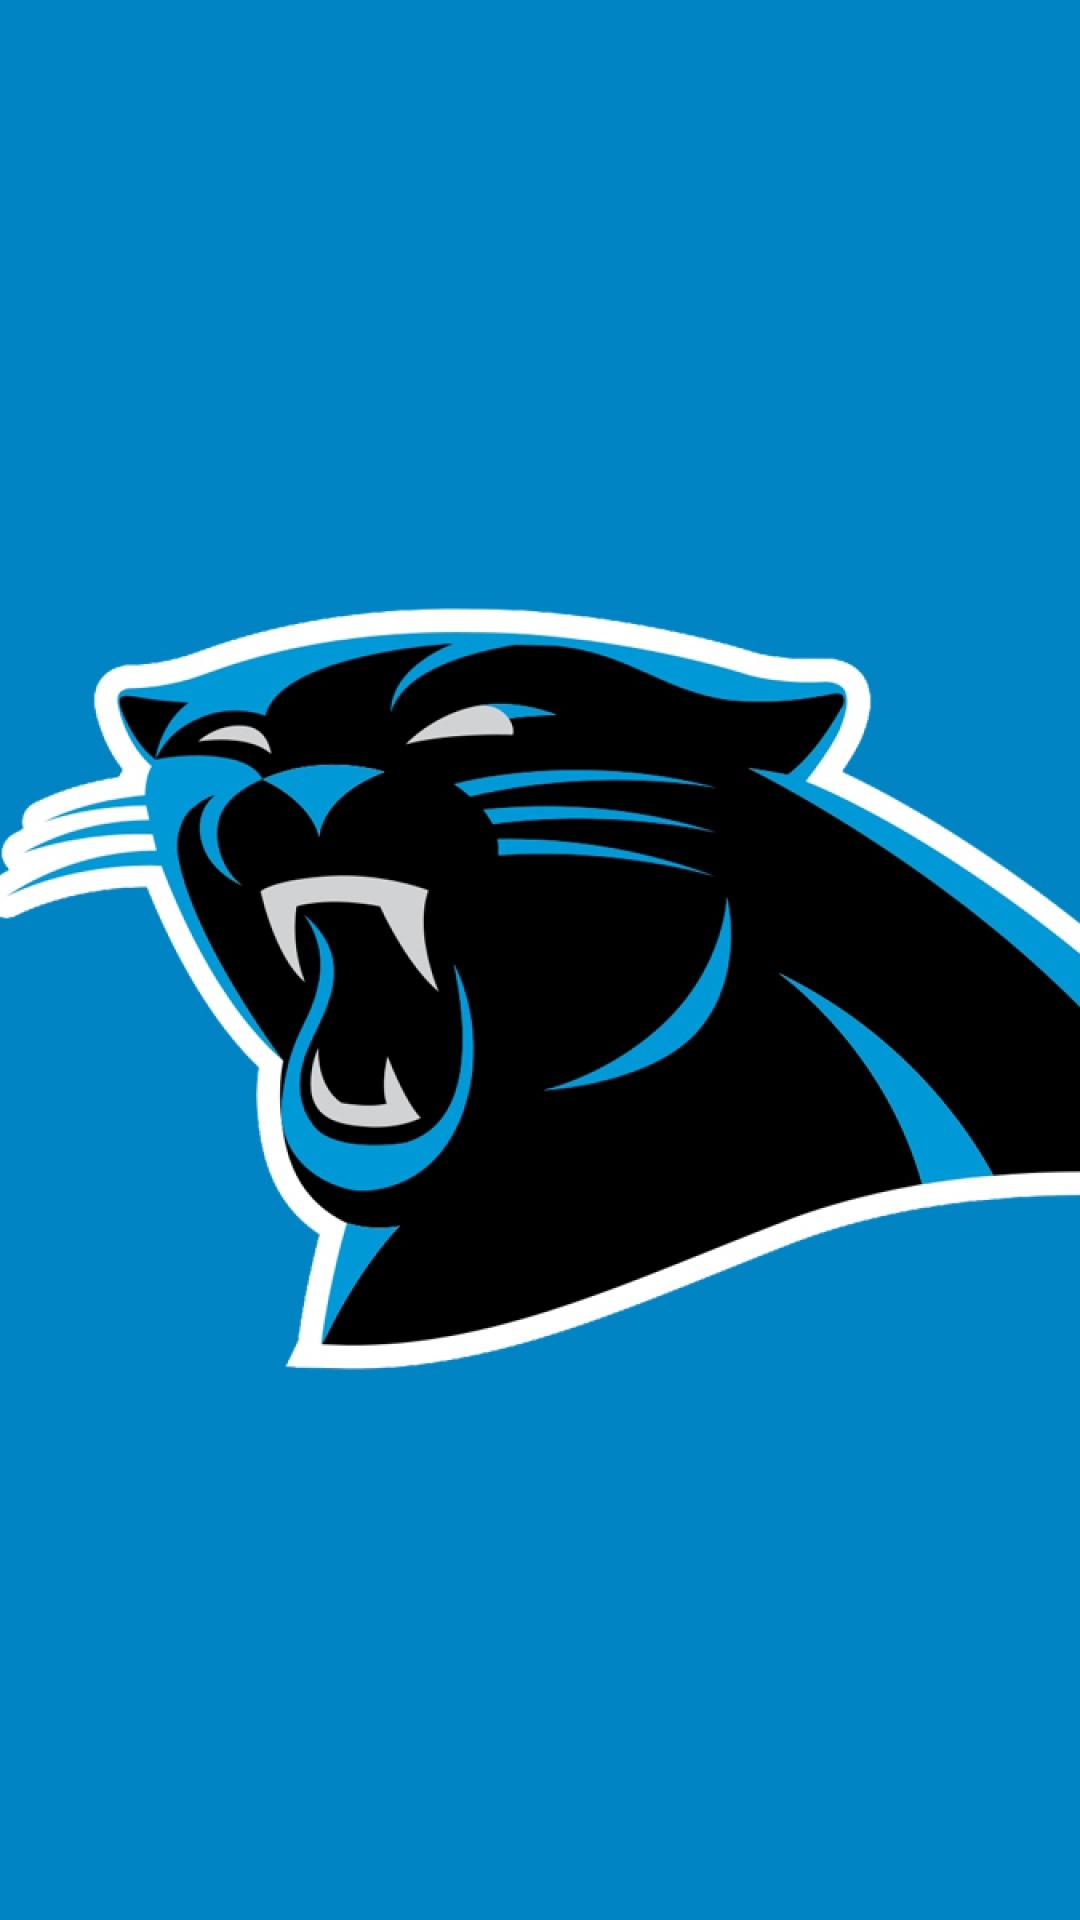 Carolina Panthers on X Wallpaper check whats yours  httpstco6LwebJylcn  X